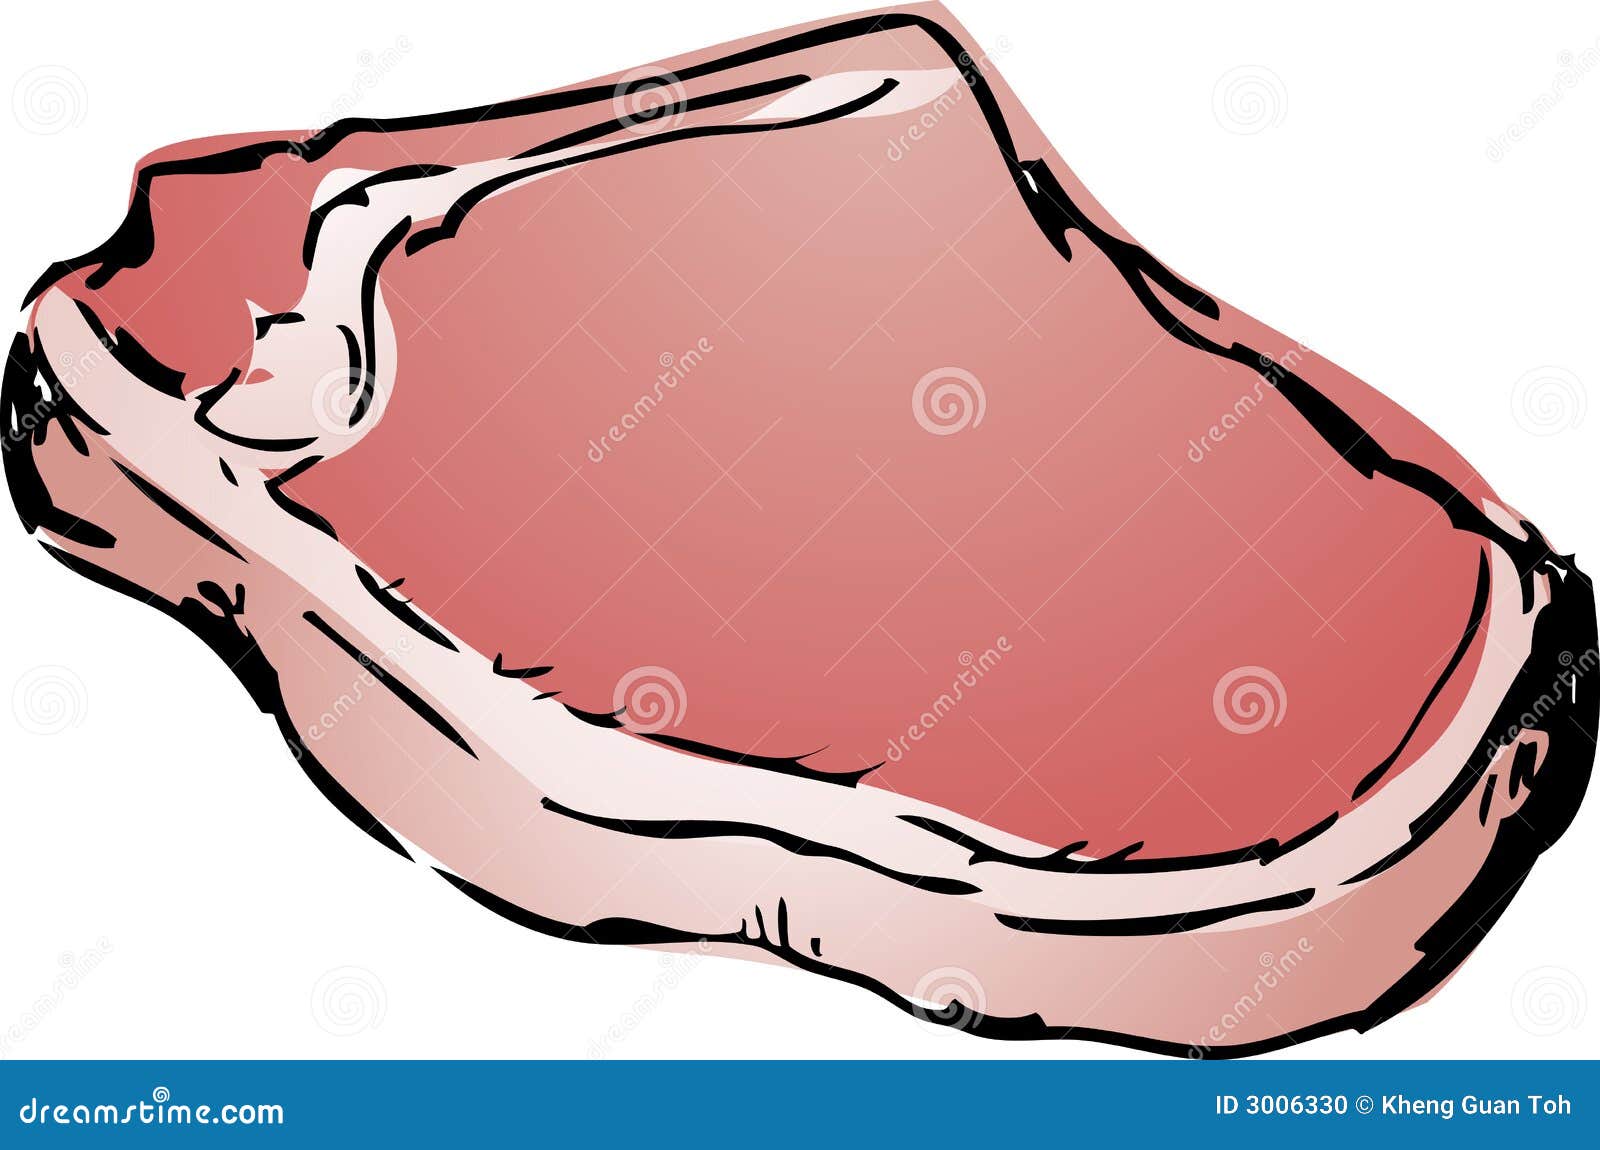 raw meat clipart - photo #41